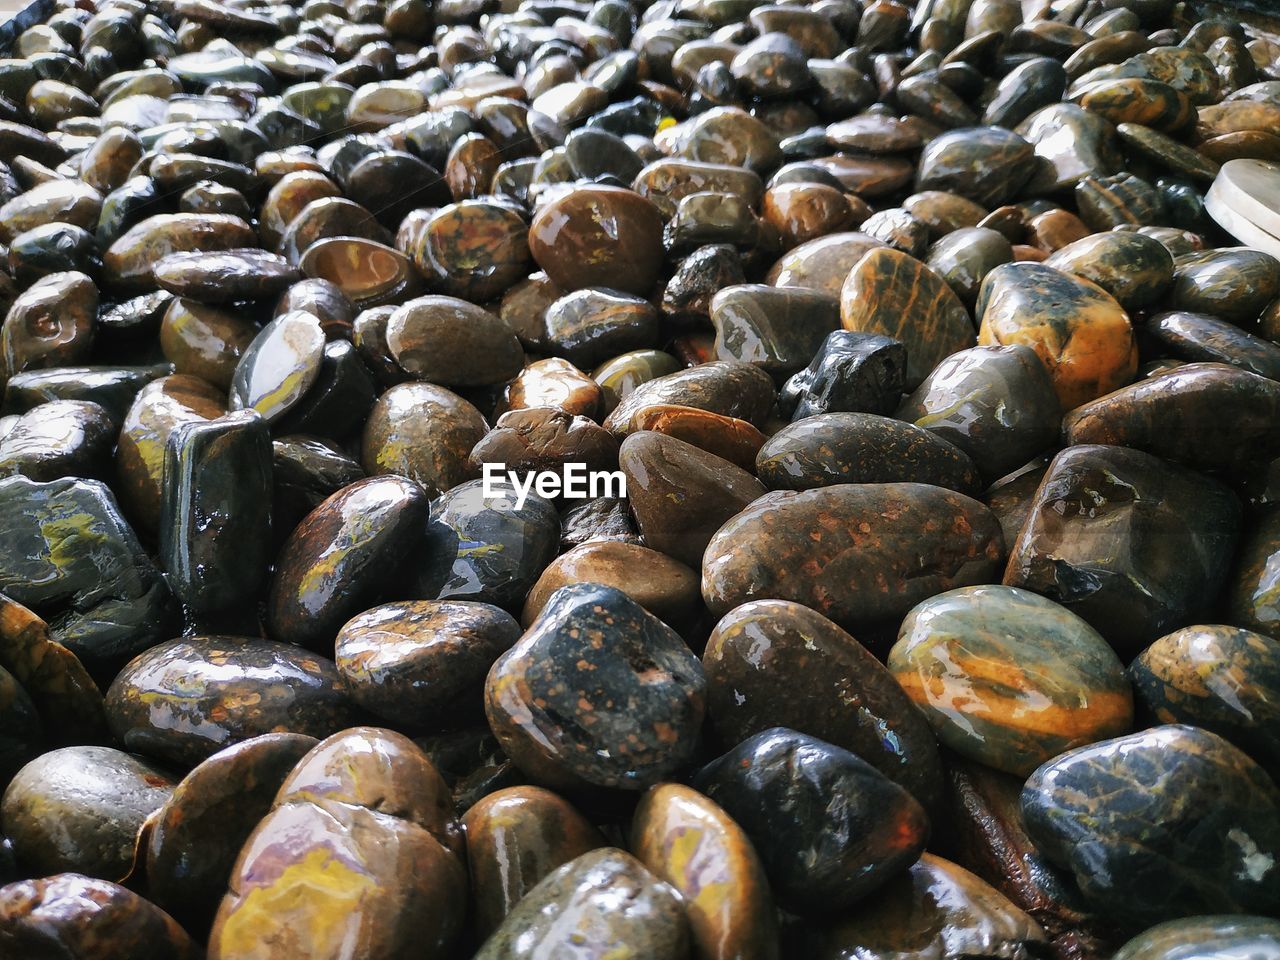 HIGH ANGLE VIEW OF PEBBLES ON STONES